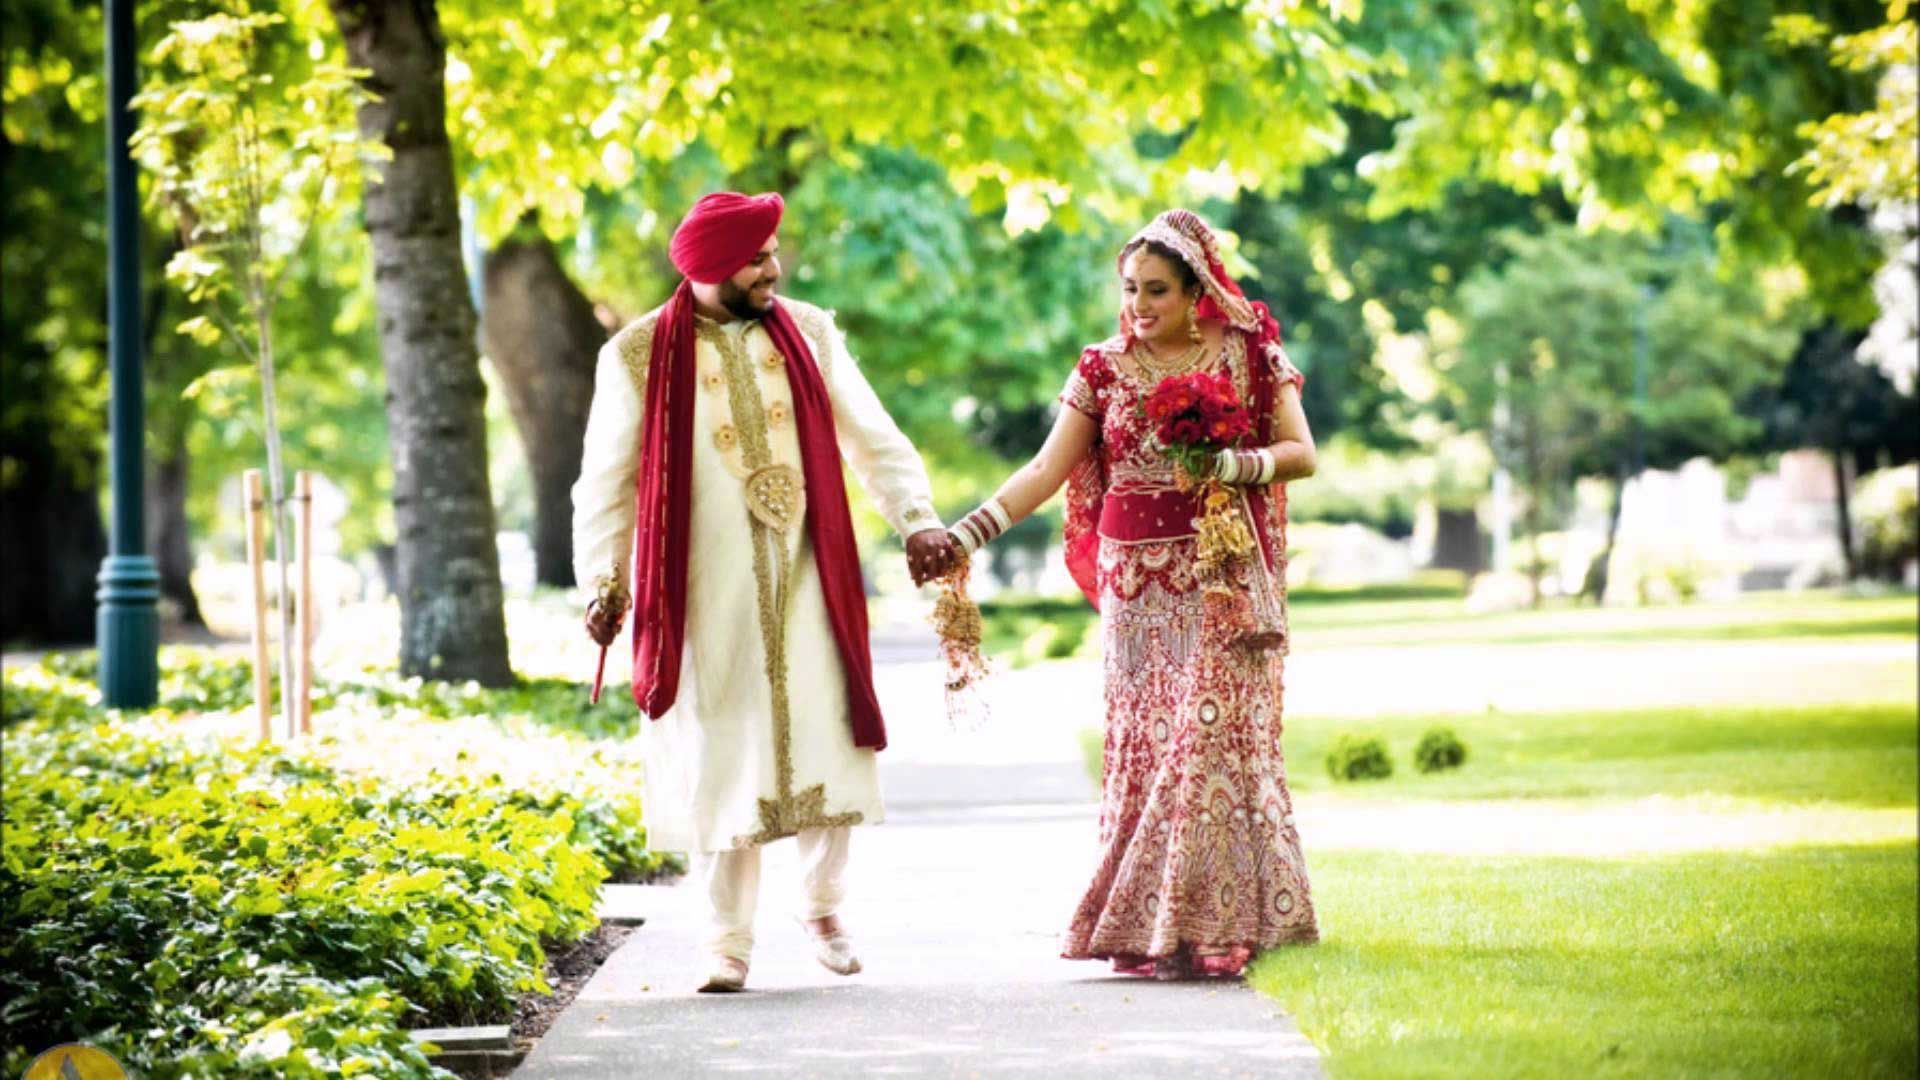 sweet cute punjabi wedding lover love couple picture HD download. Wedding image, Love couple photo, Love couple wallpaper